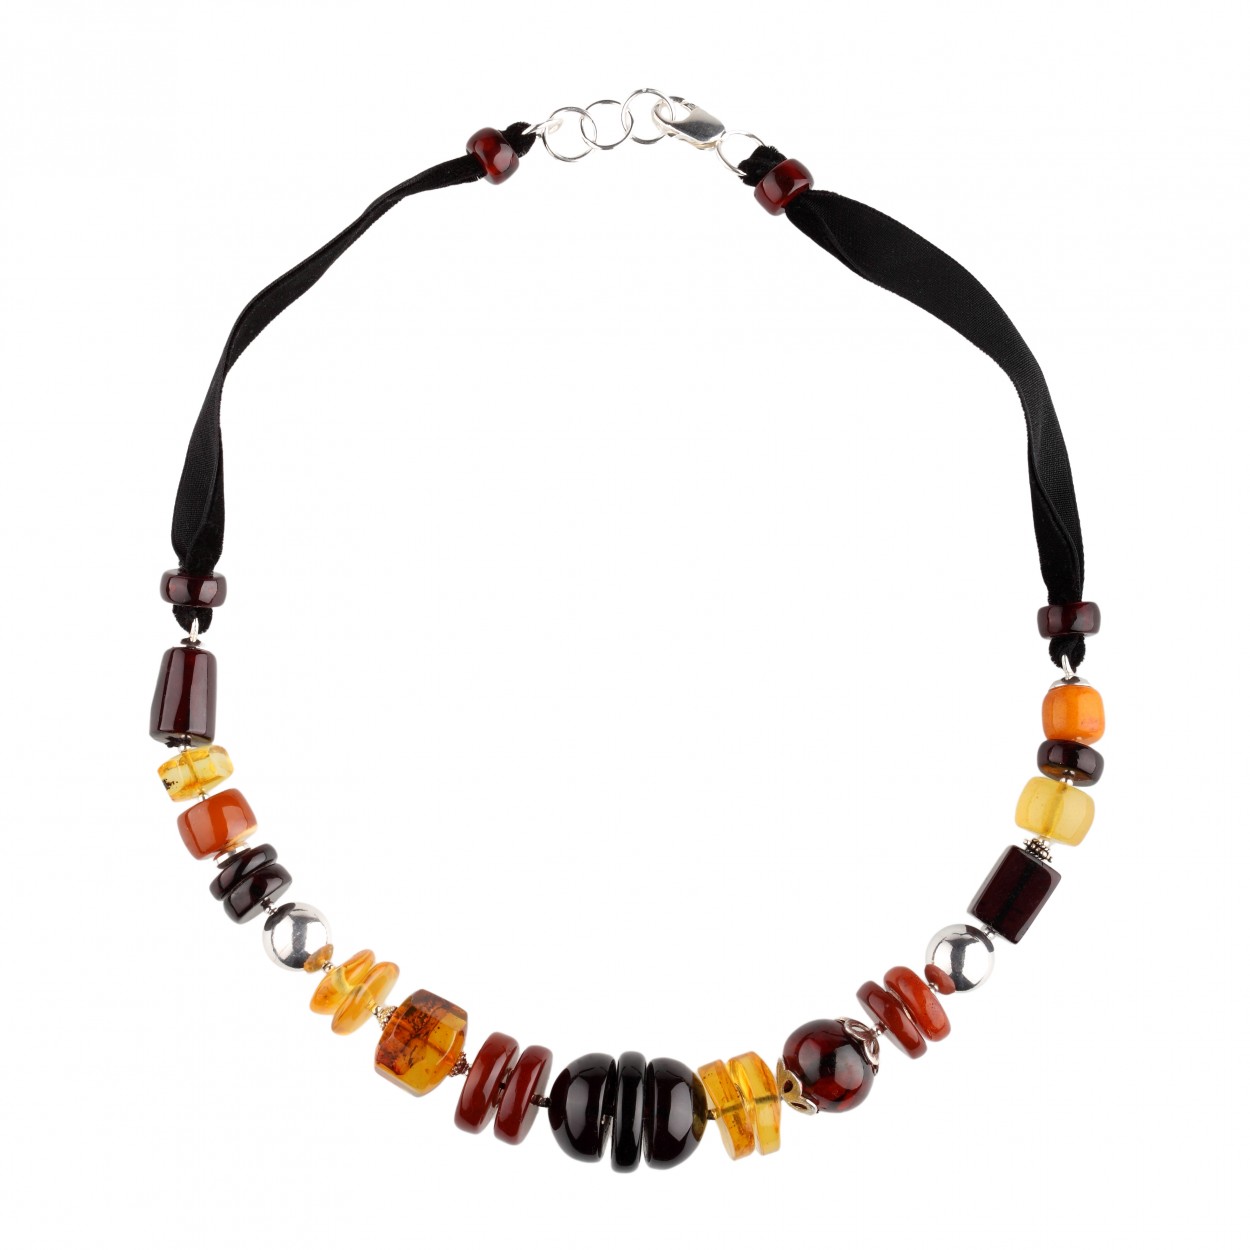  Royal Amber Necklace